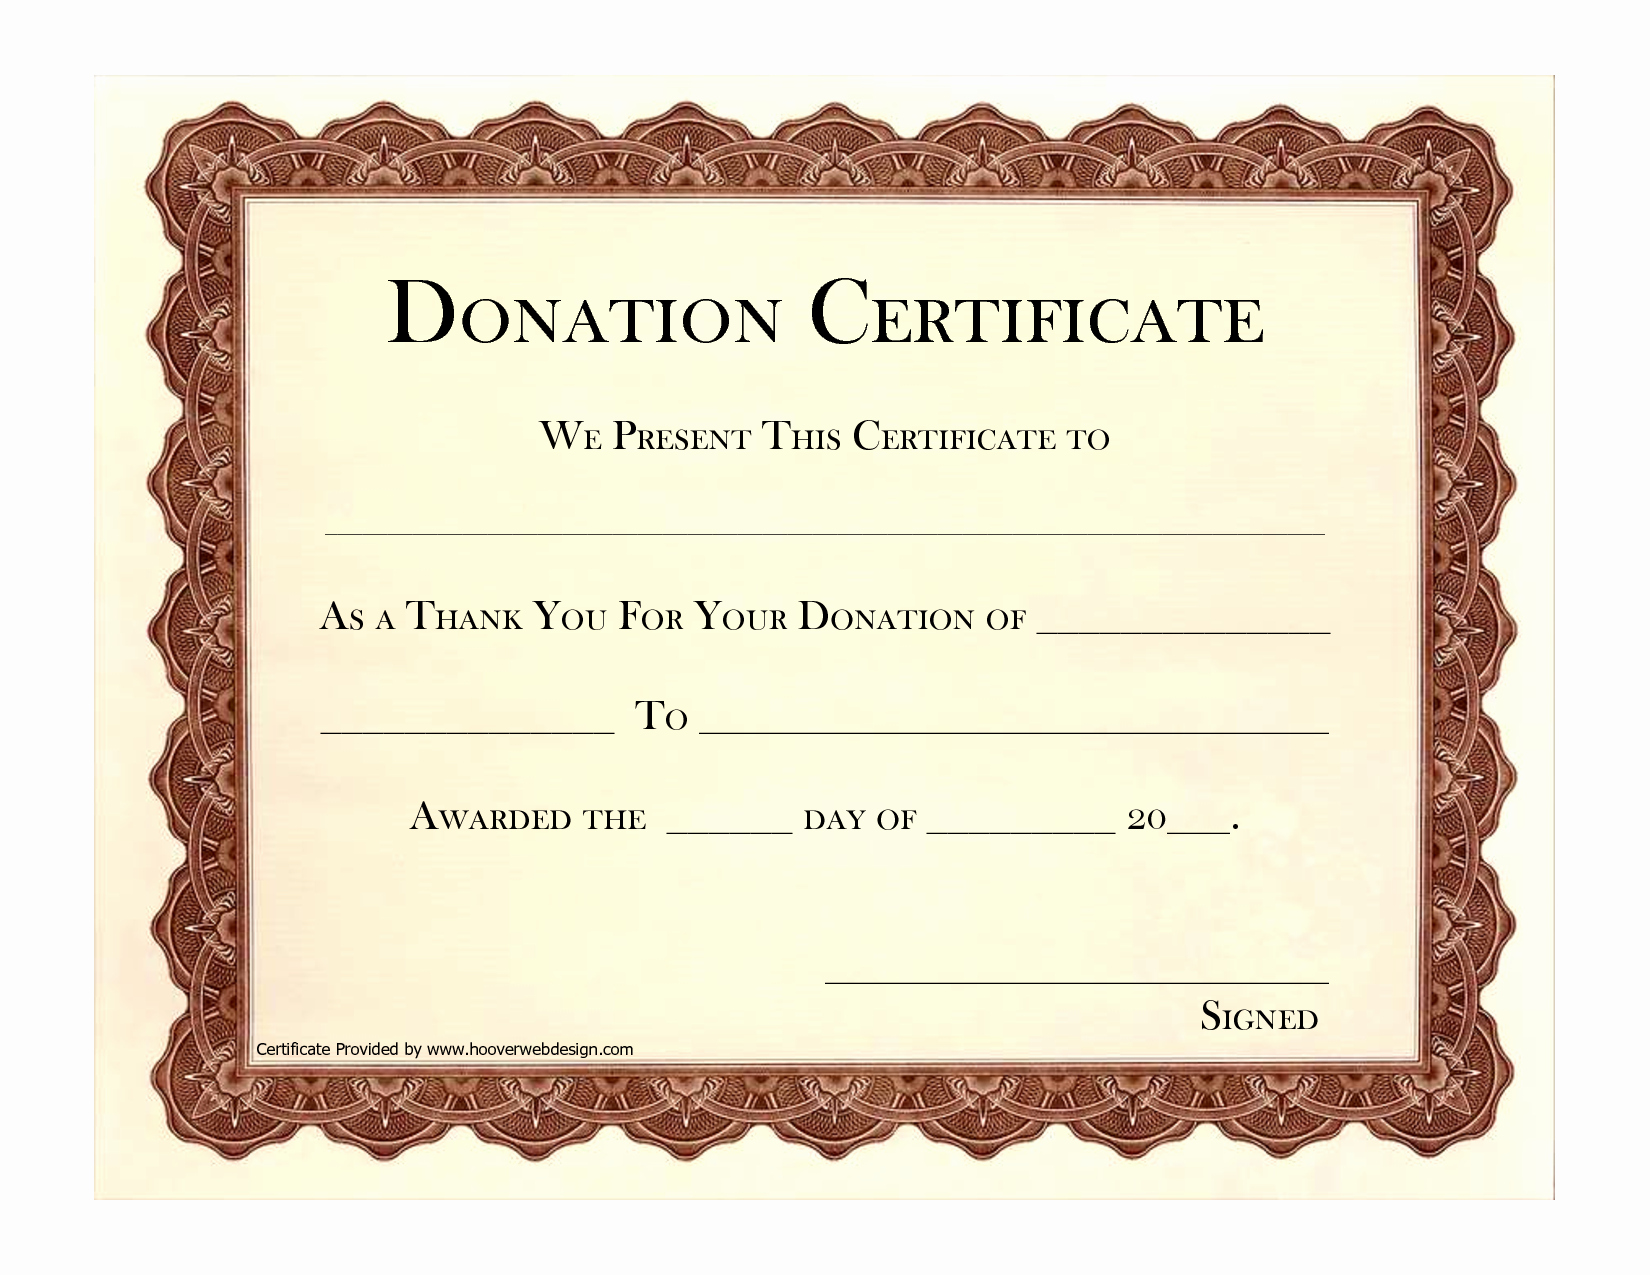 Donation Certificate Template Free Awesome Certificate Template Category Page 1 Efoza